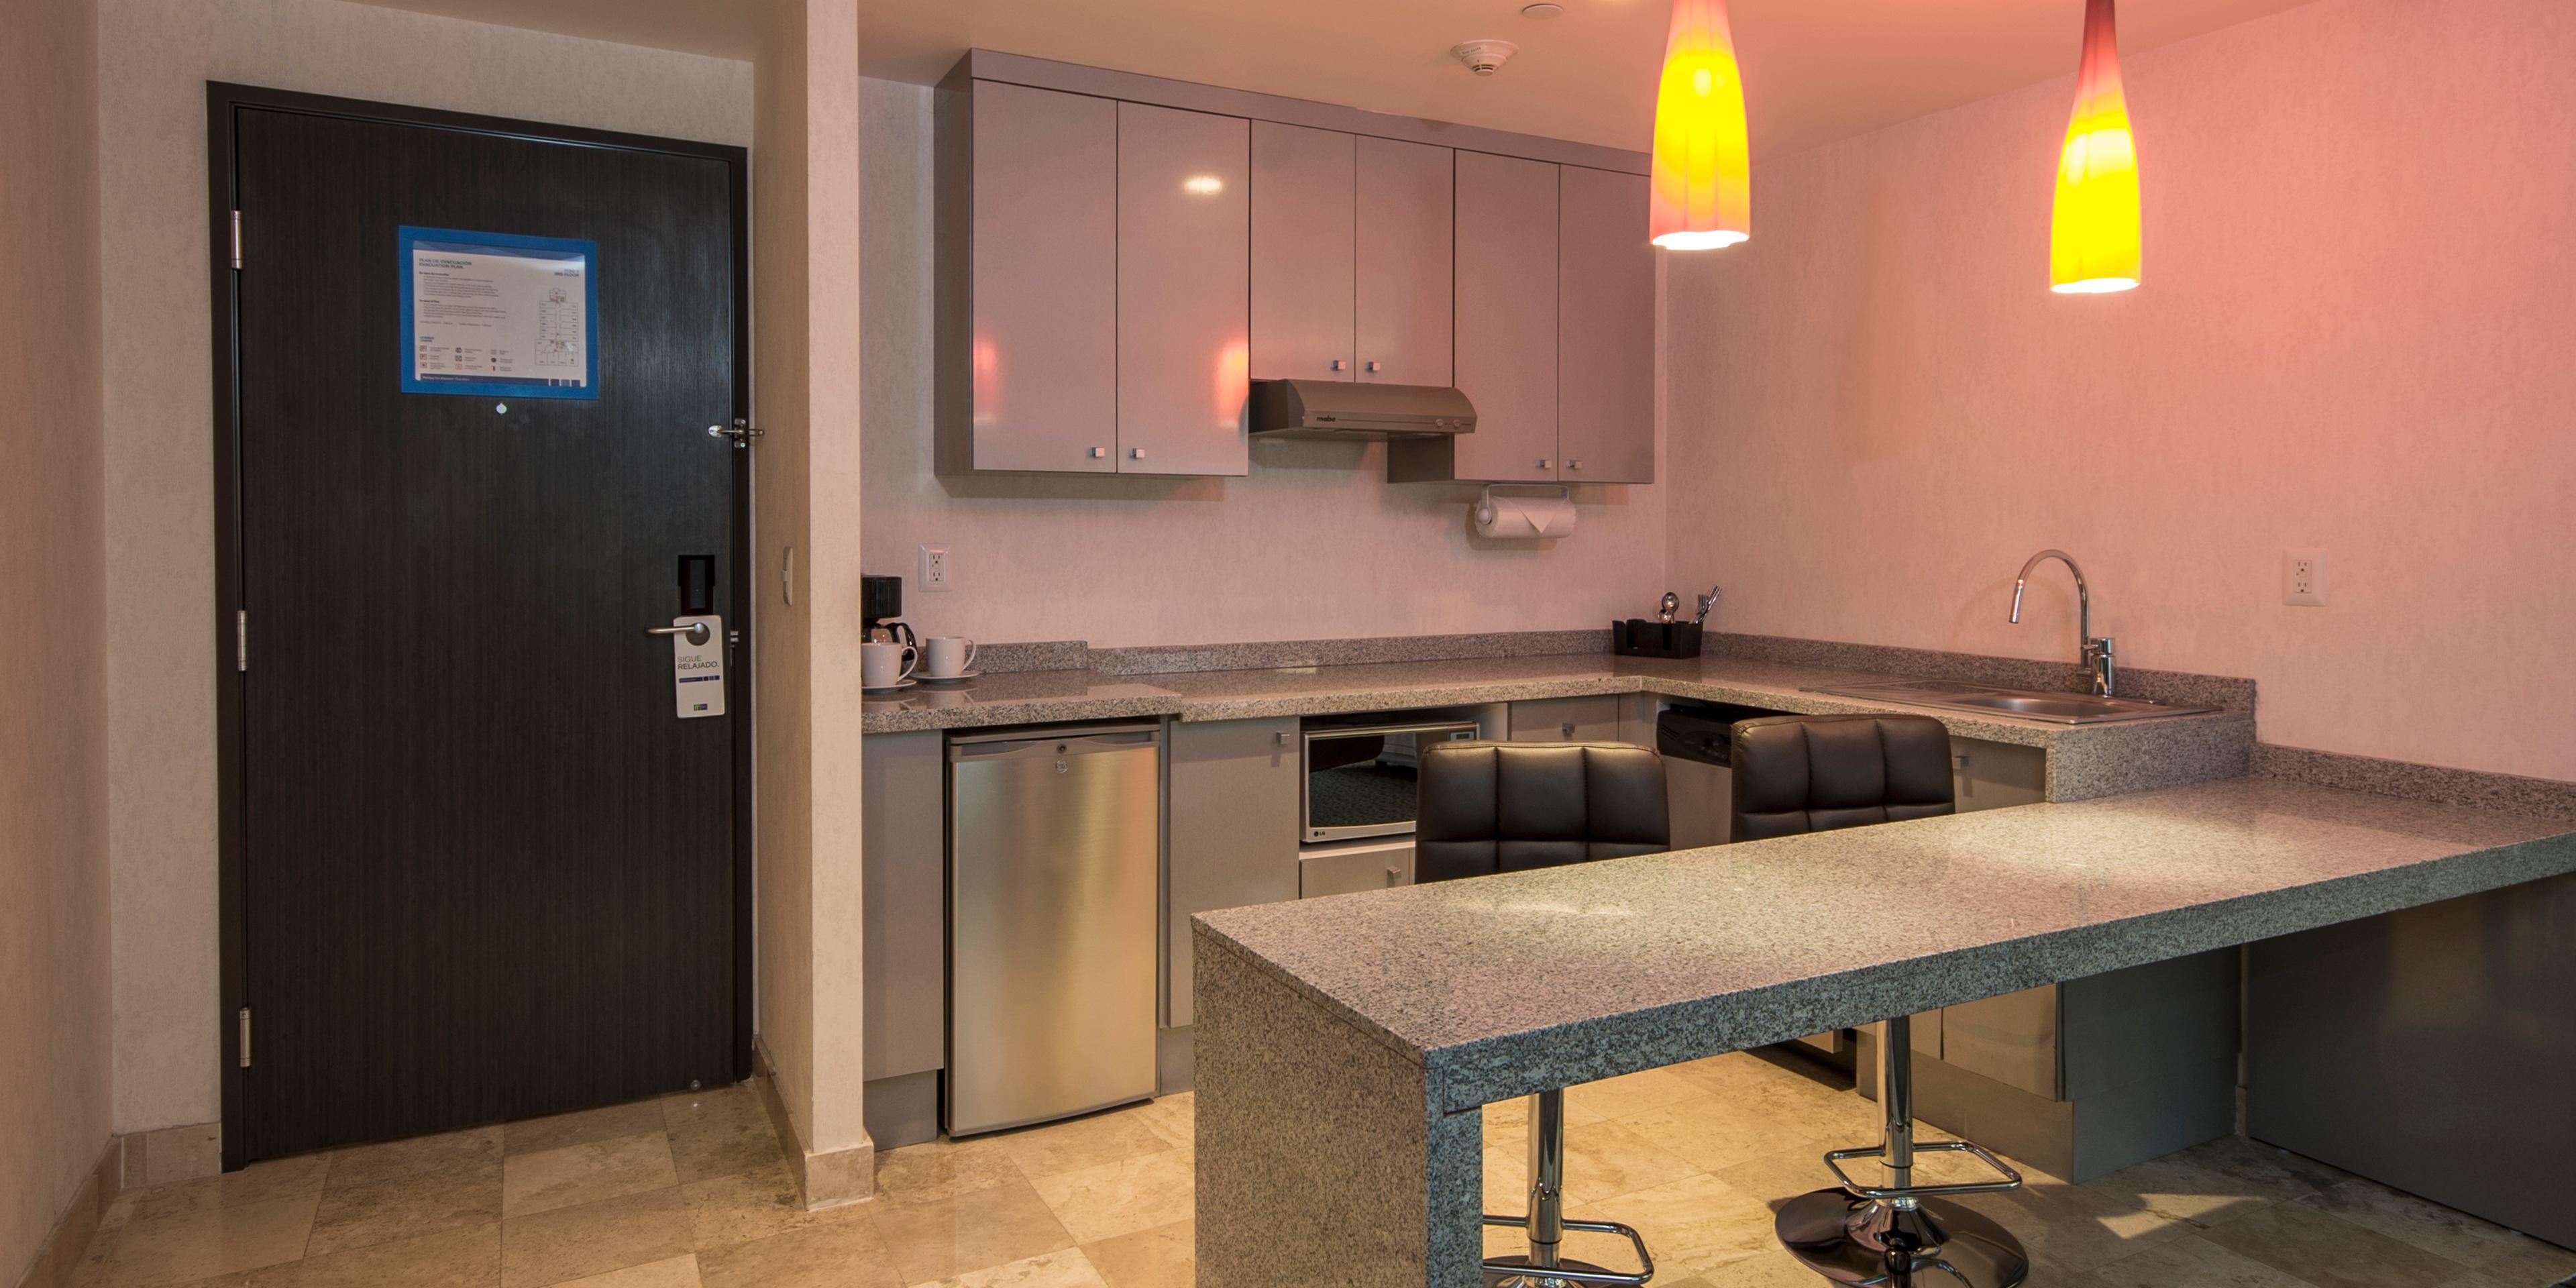 We provide the most spacious rooms and suites in the city to offer a pleasant experience of comfort and rest; all suites have an equipped kitchenette.

Please  ask front desk for availability.